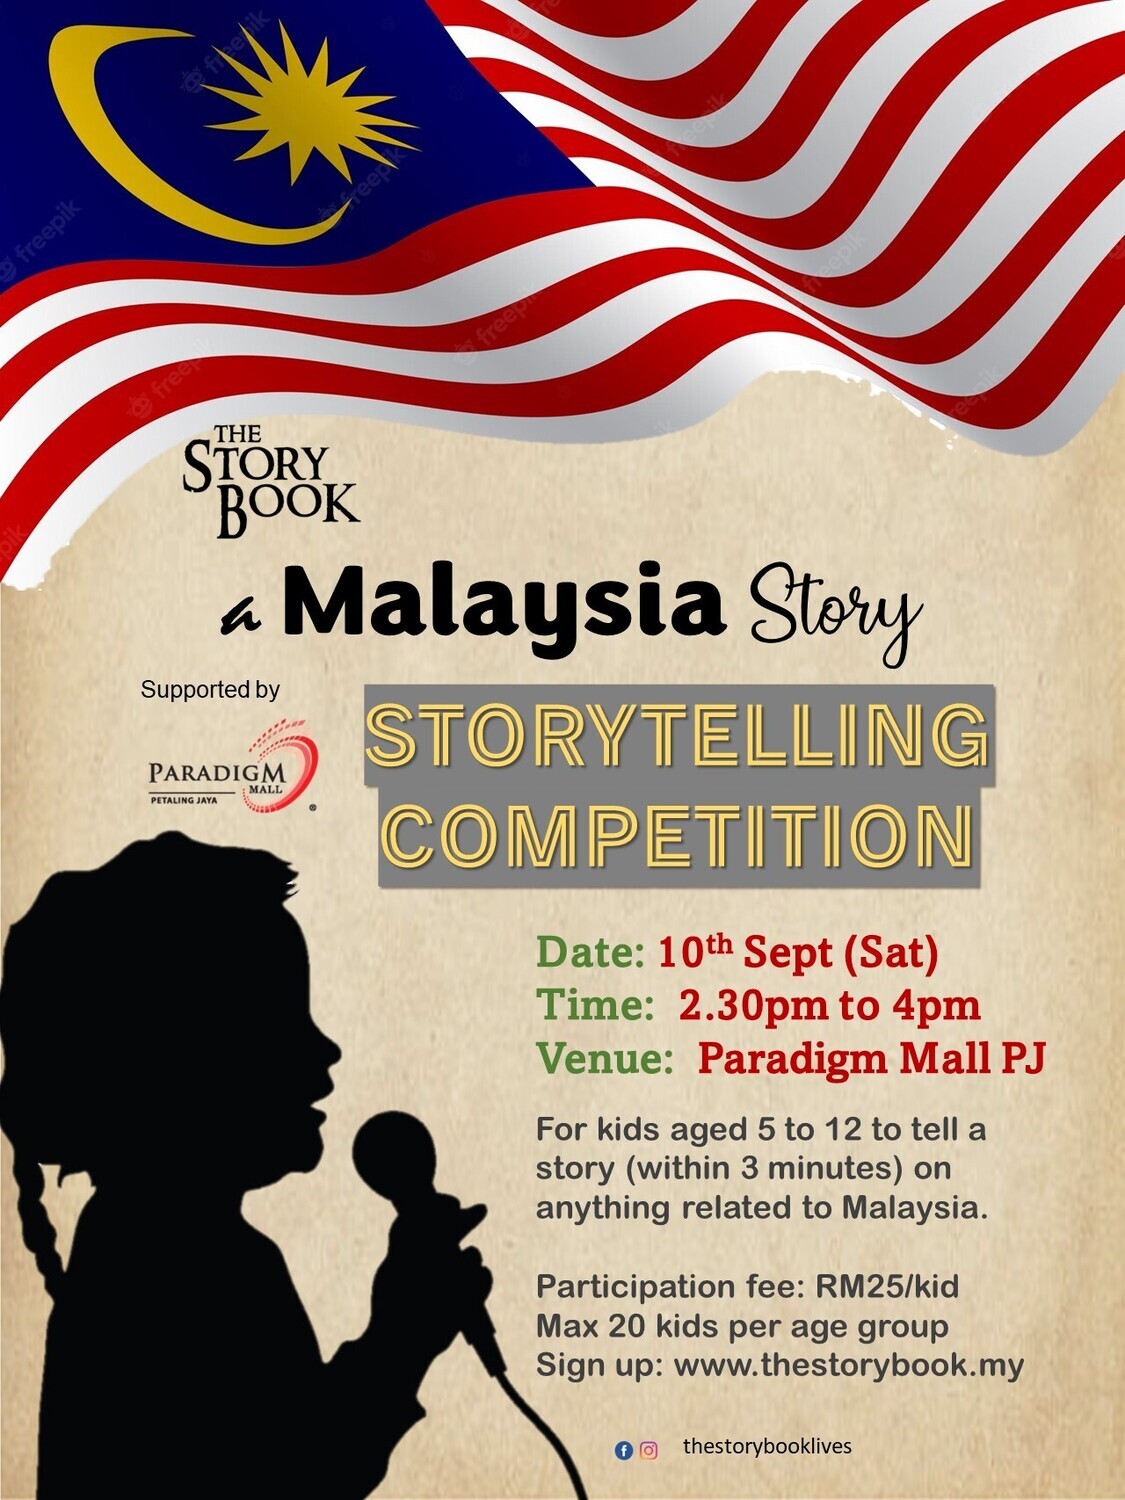 'A Malaysia Story' Storytelling Competition